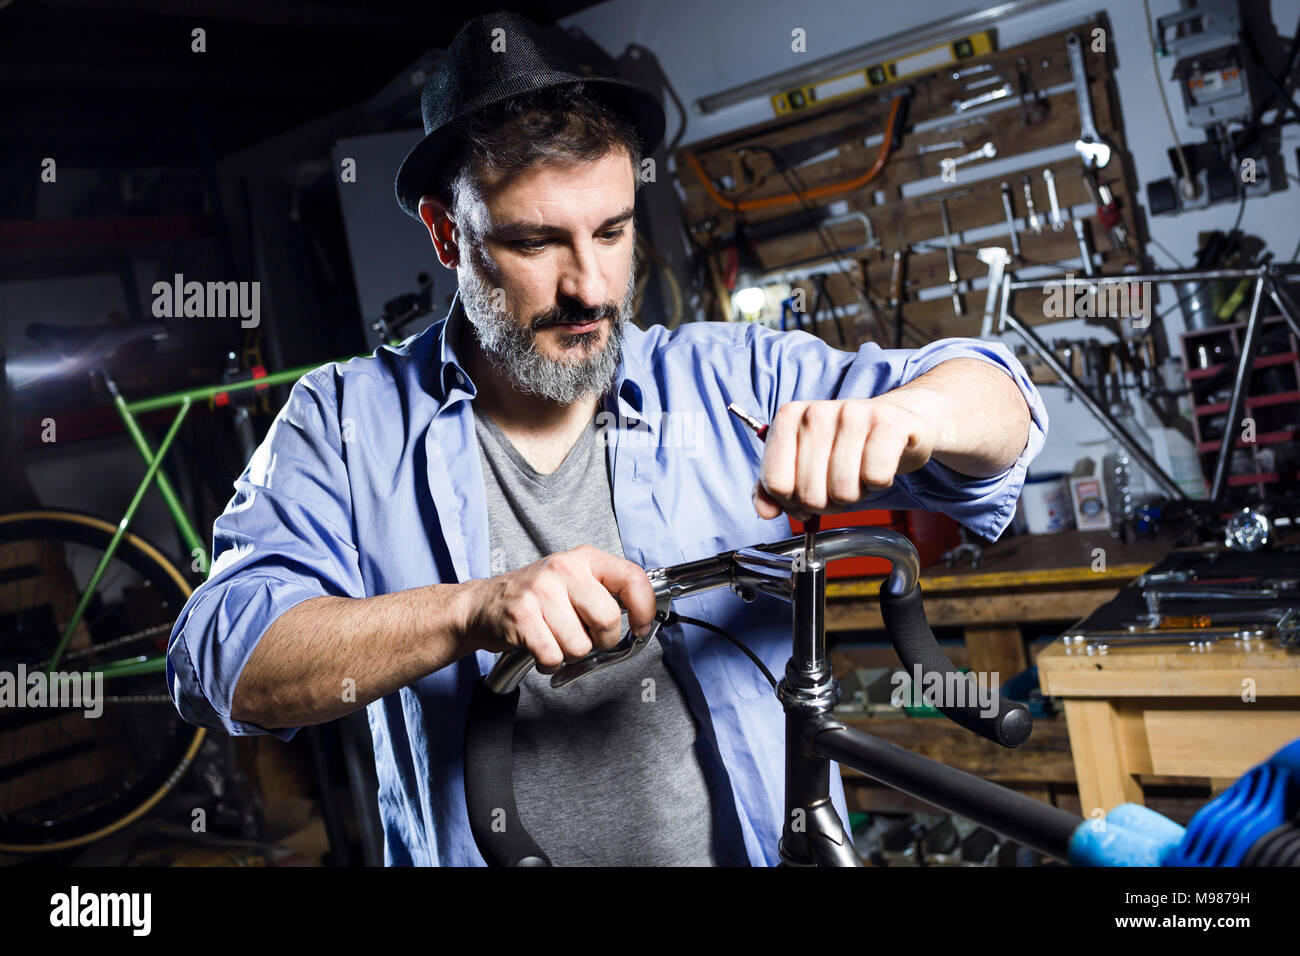 Man working on bicycle in workshop Banque D'Images